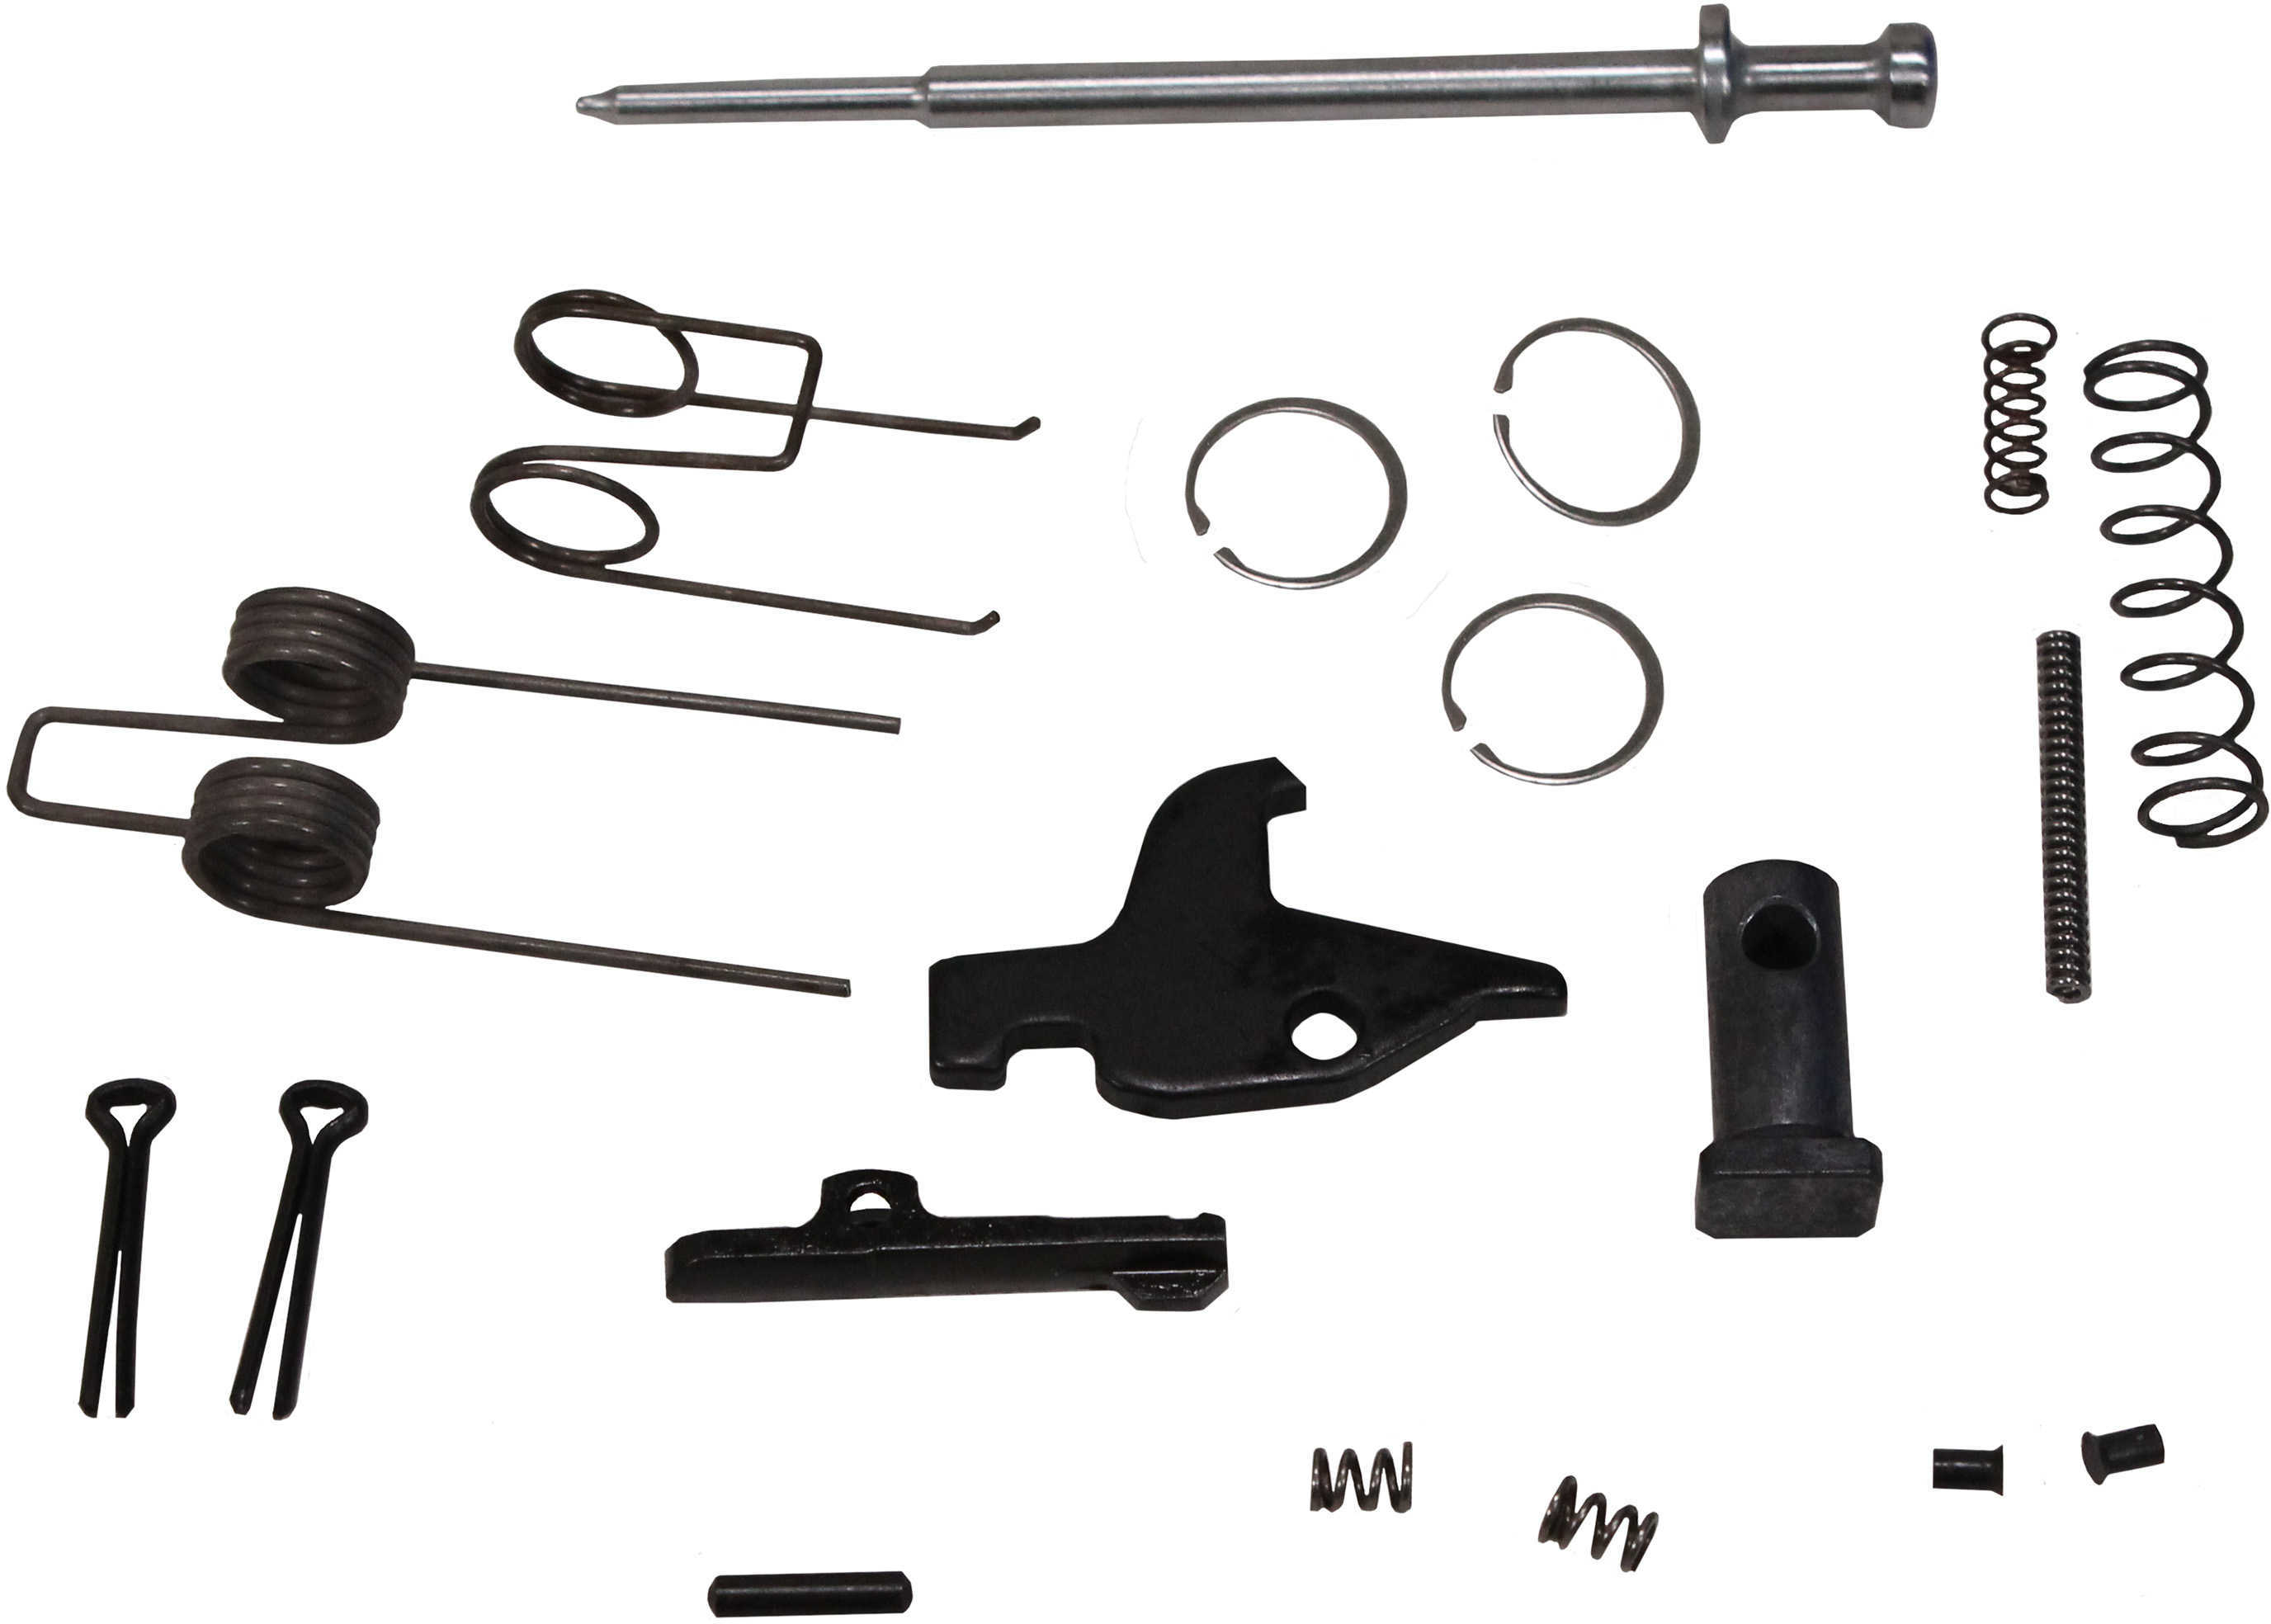 Bushmaster Field Repair Kit Part Includes High Breakage And commonly Lost items For AR-15 93380